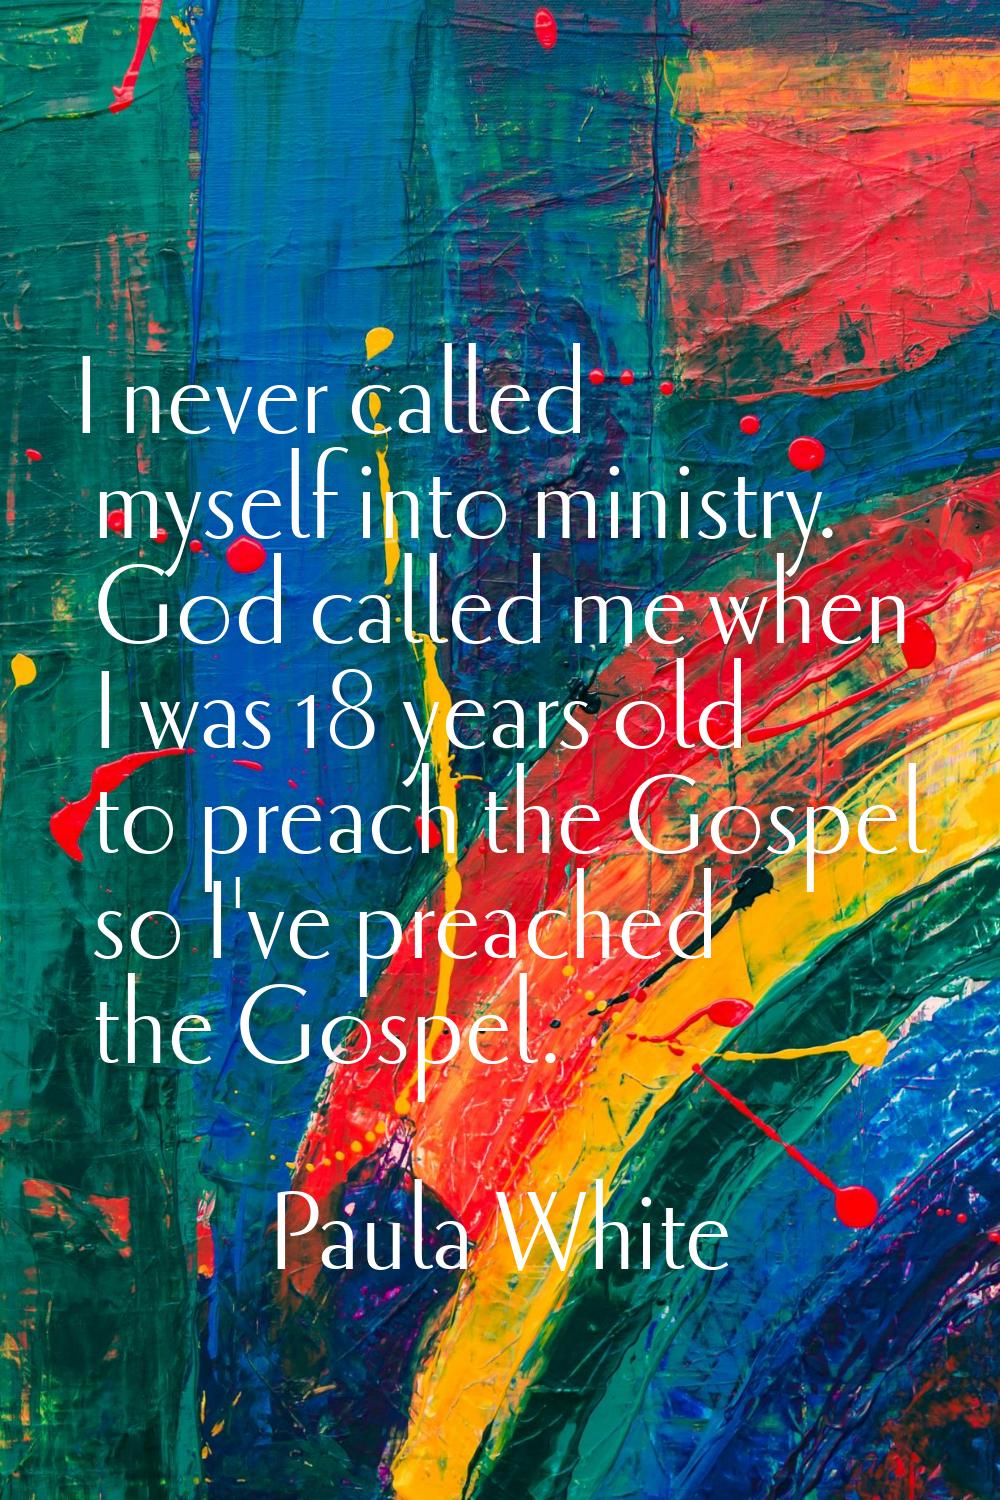 I never called myself into ministry. God called me when I was 18 years old to preach the Gospel so 